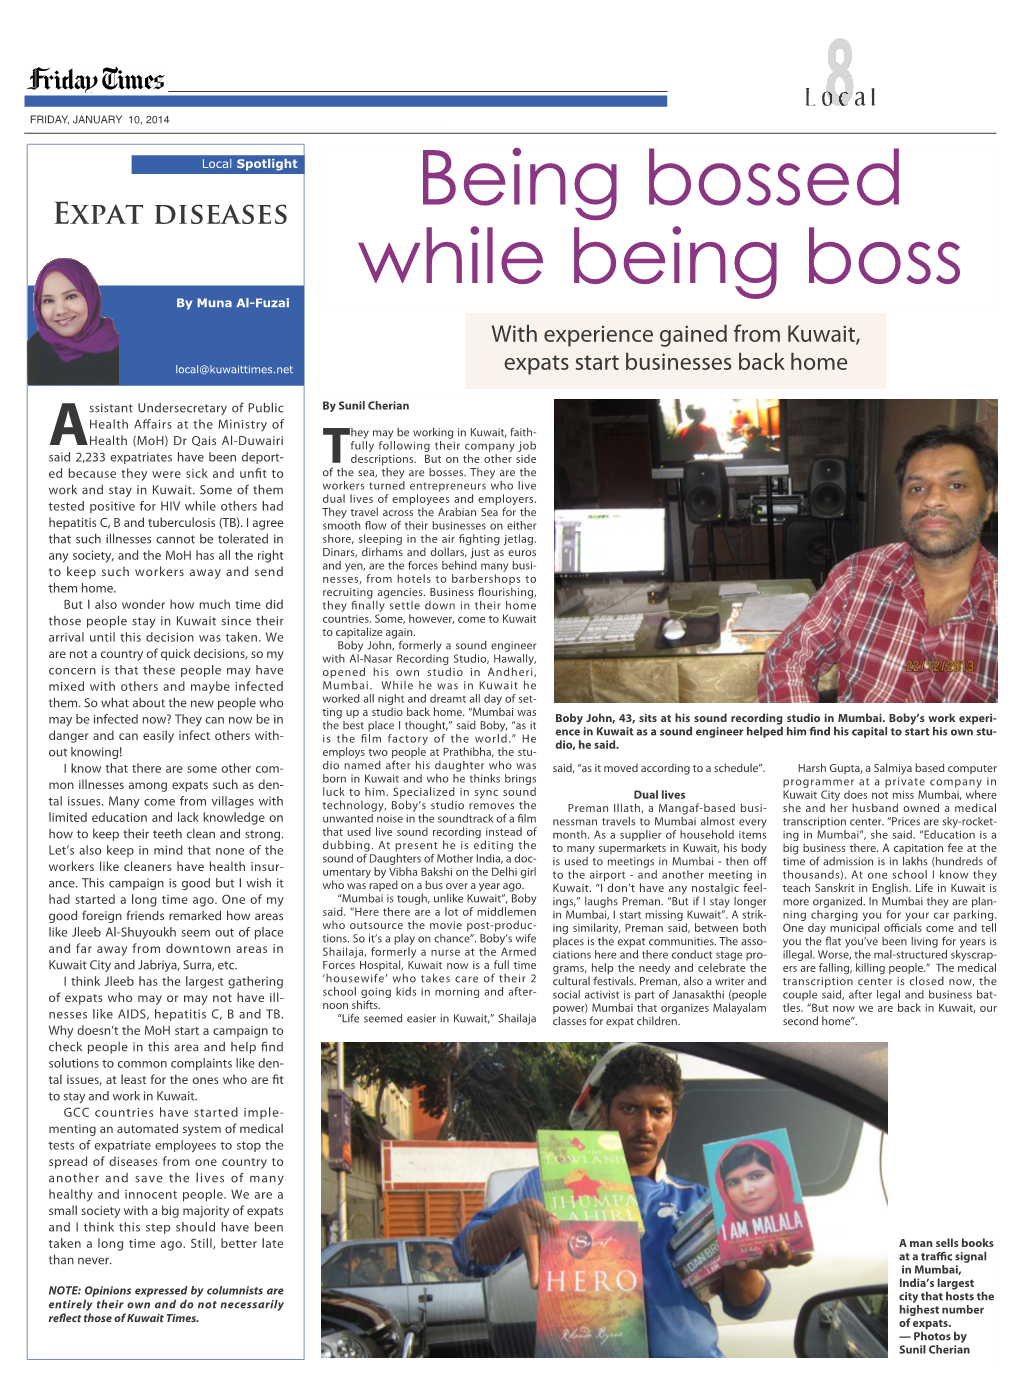 Being Bossed While Being Boss by Muna Al-Fuzai with Experience Gained from Kuwait